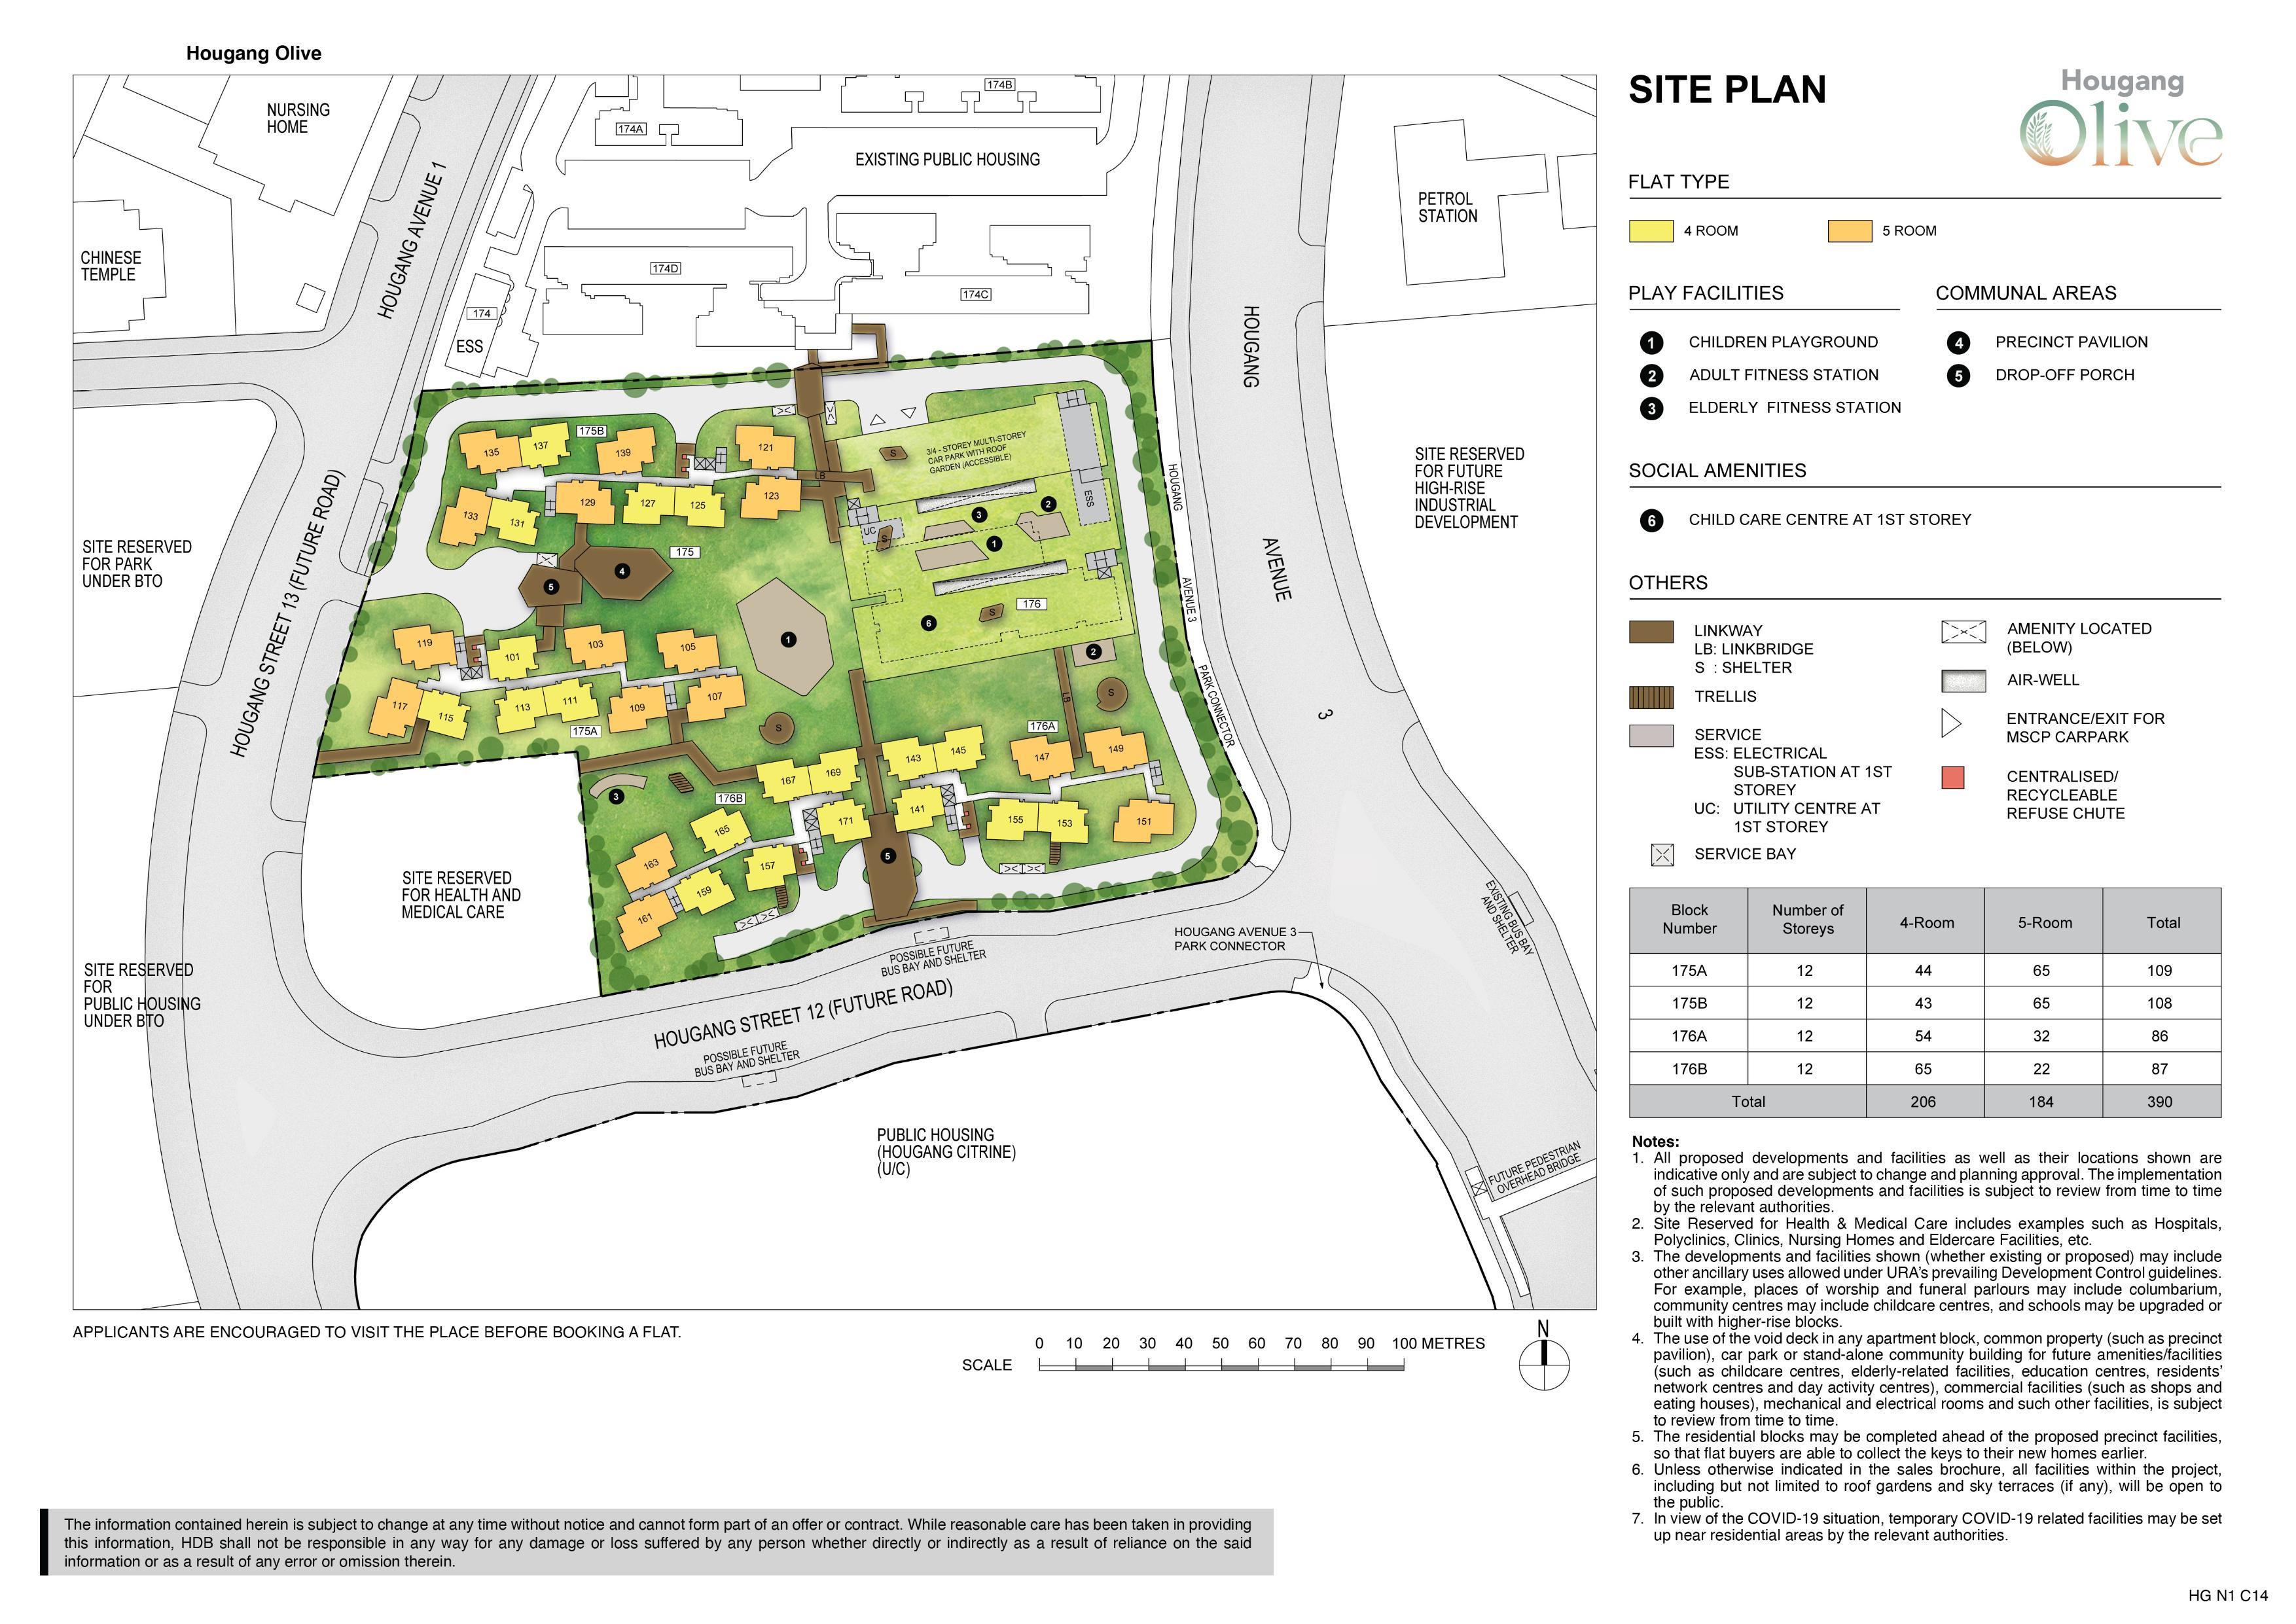 Hougang Olive Site Plan